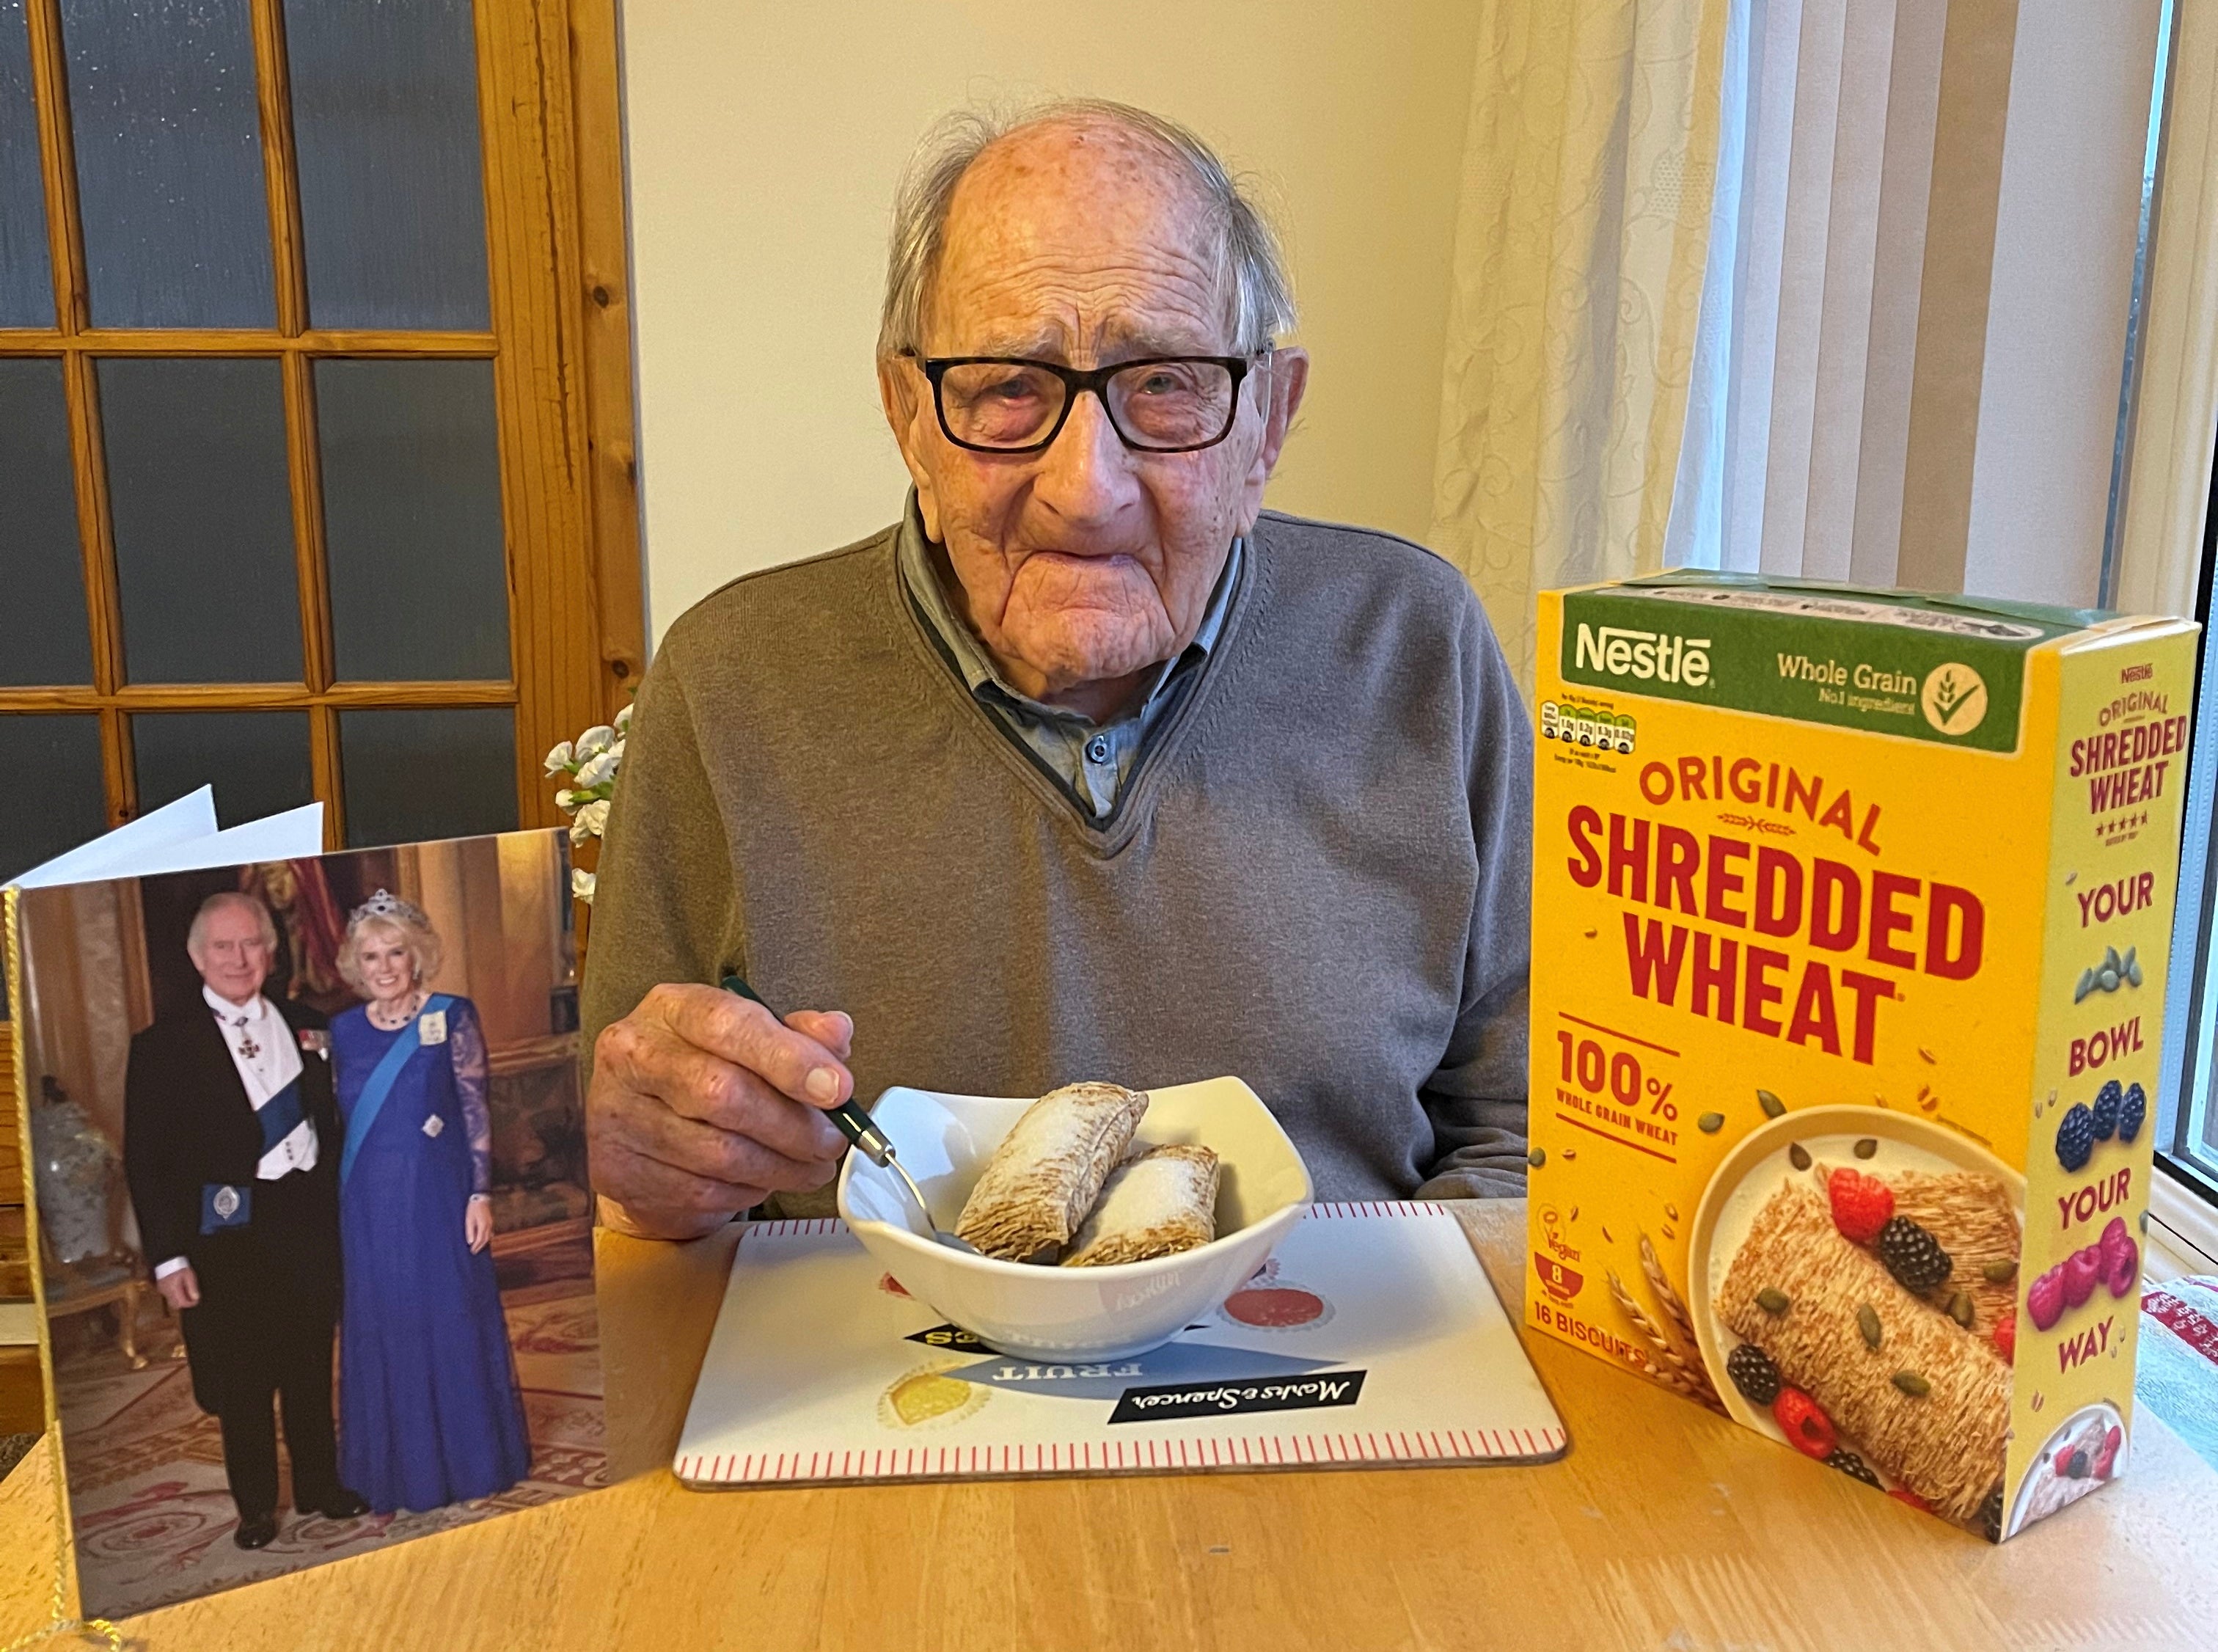 Leonard Howes and his Shredded Wheat